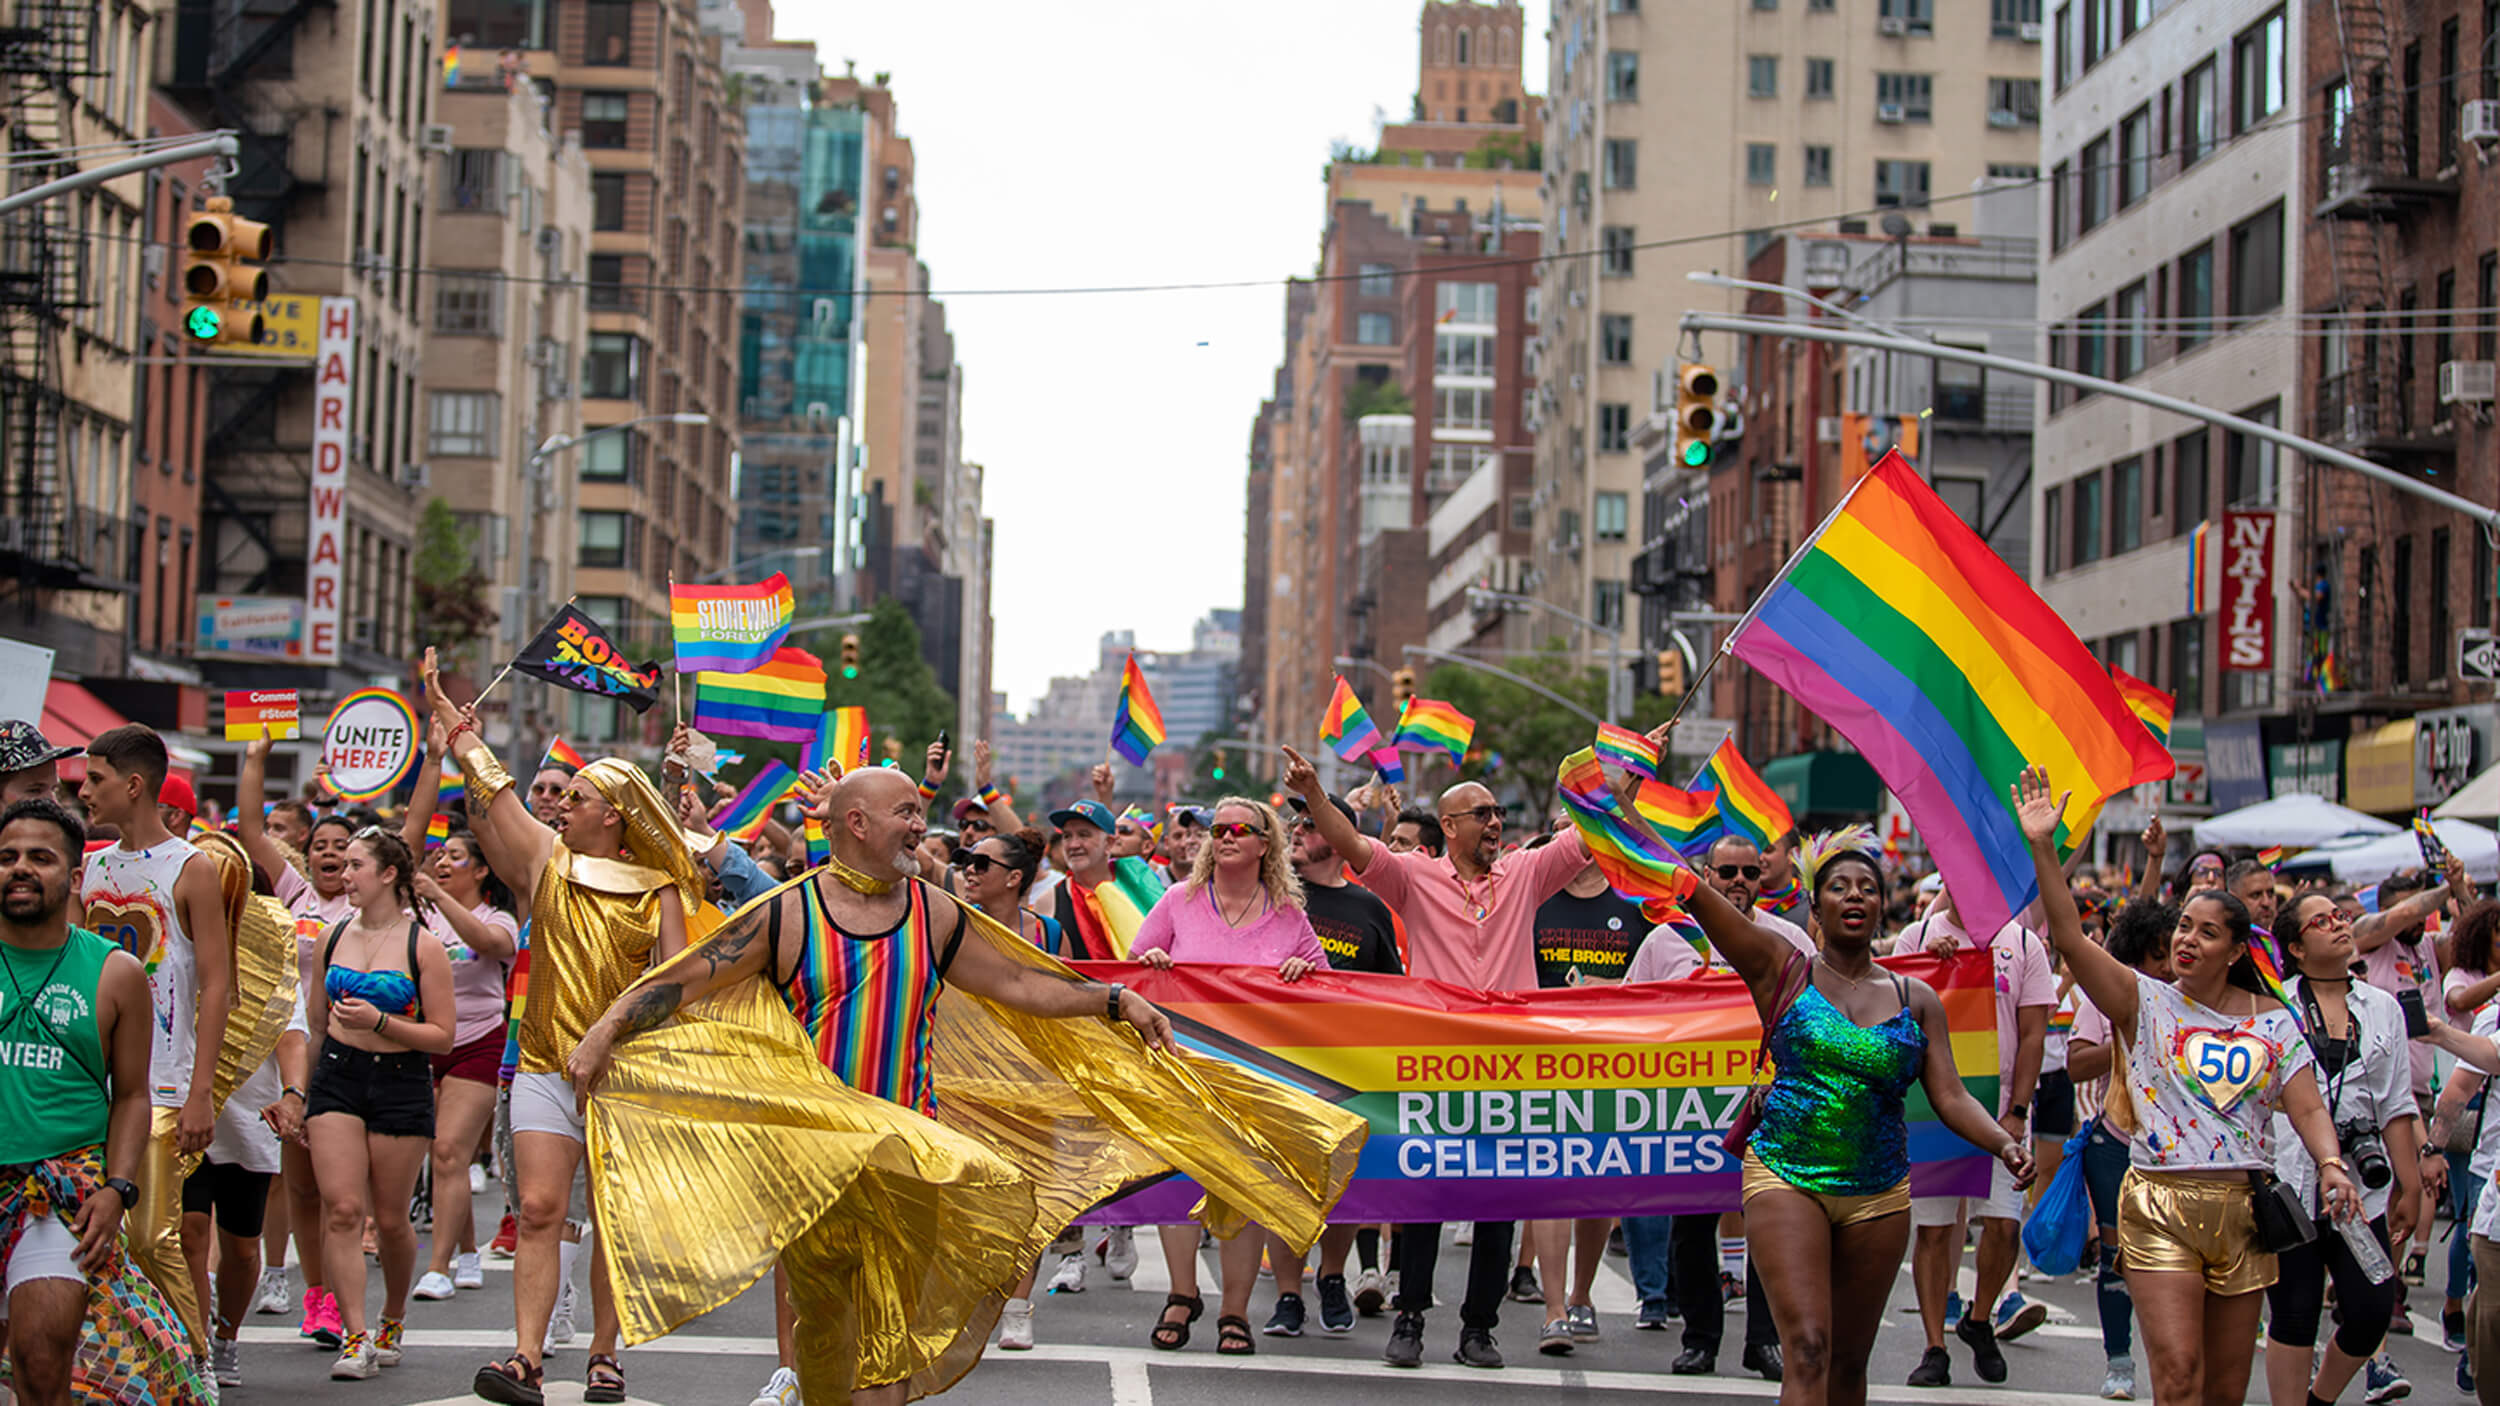 where does the nyc gay pride parade start